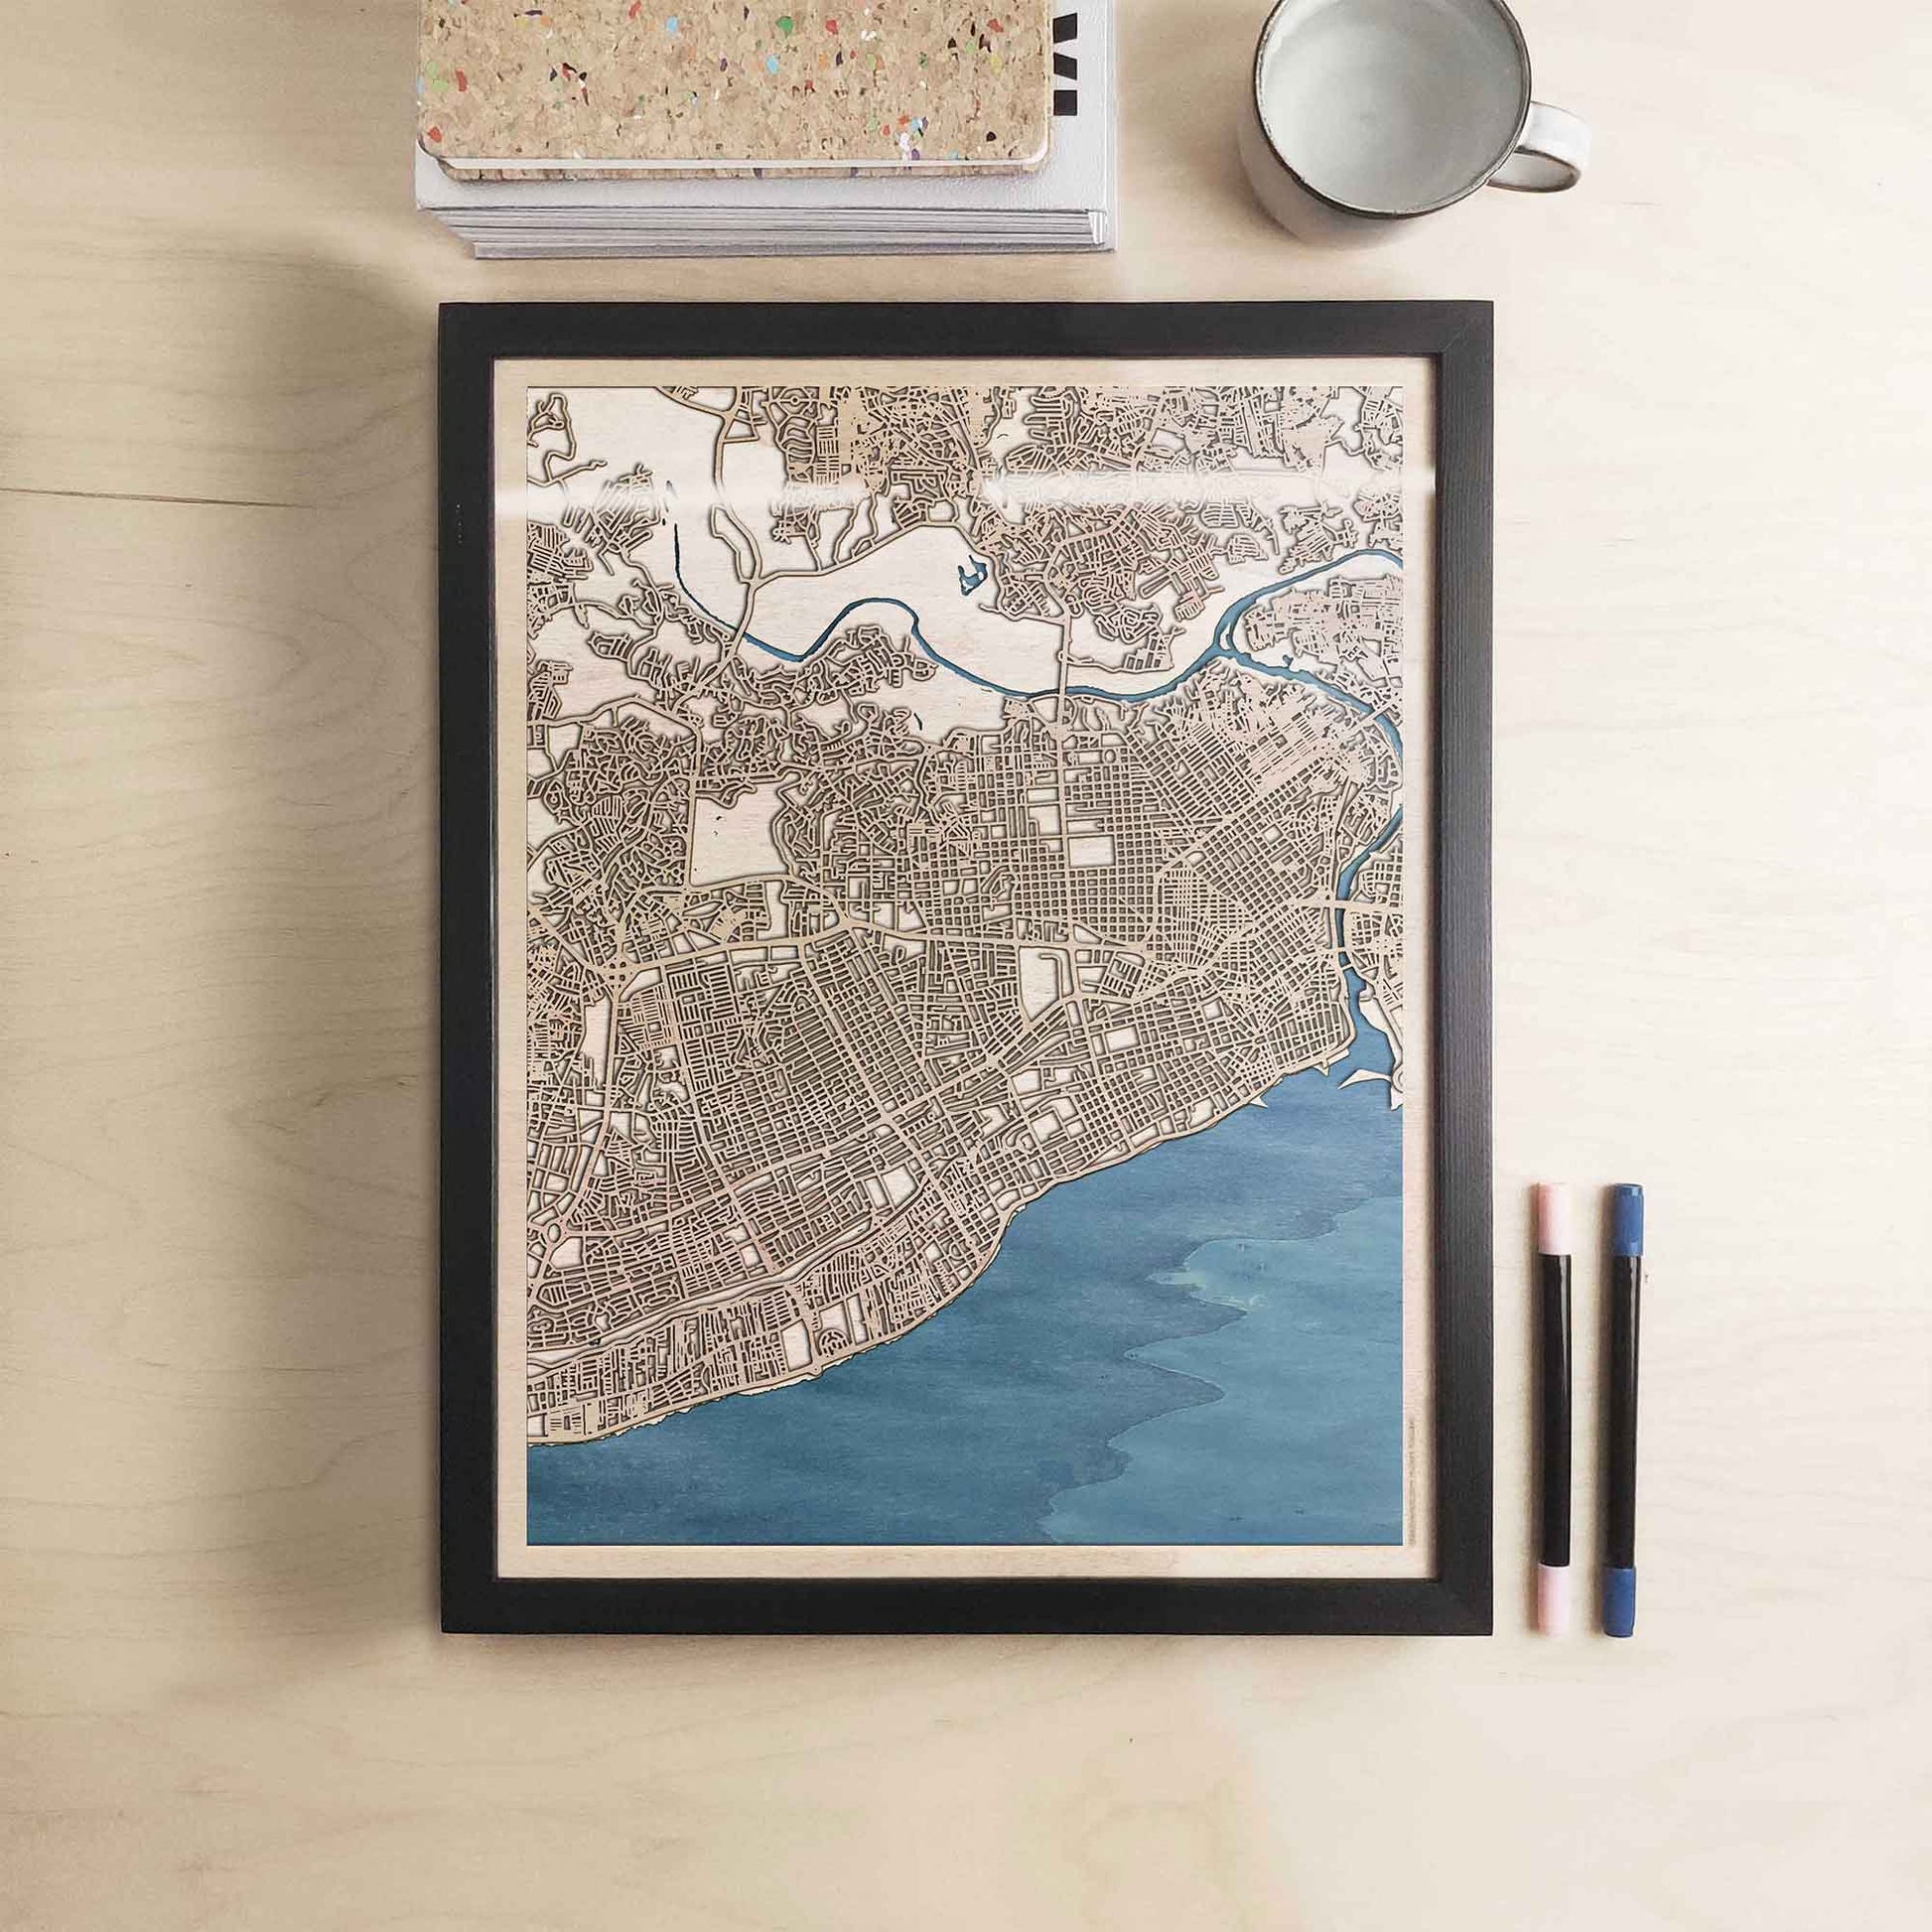 Santo Domingo Wooden Map by CityWood - Custom Wood Map Art - Unique Laser Cut Engraved - Anniversary Gift